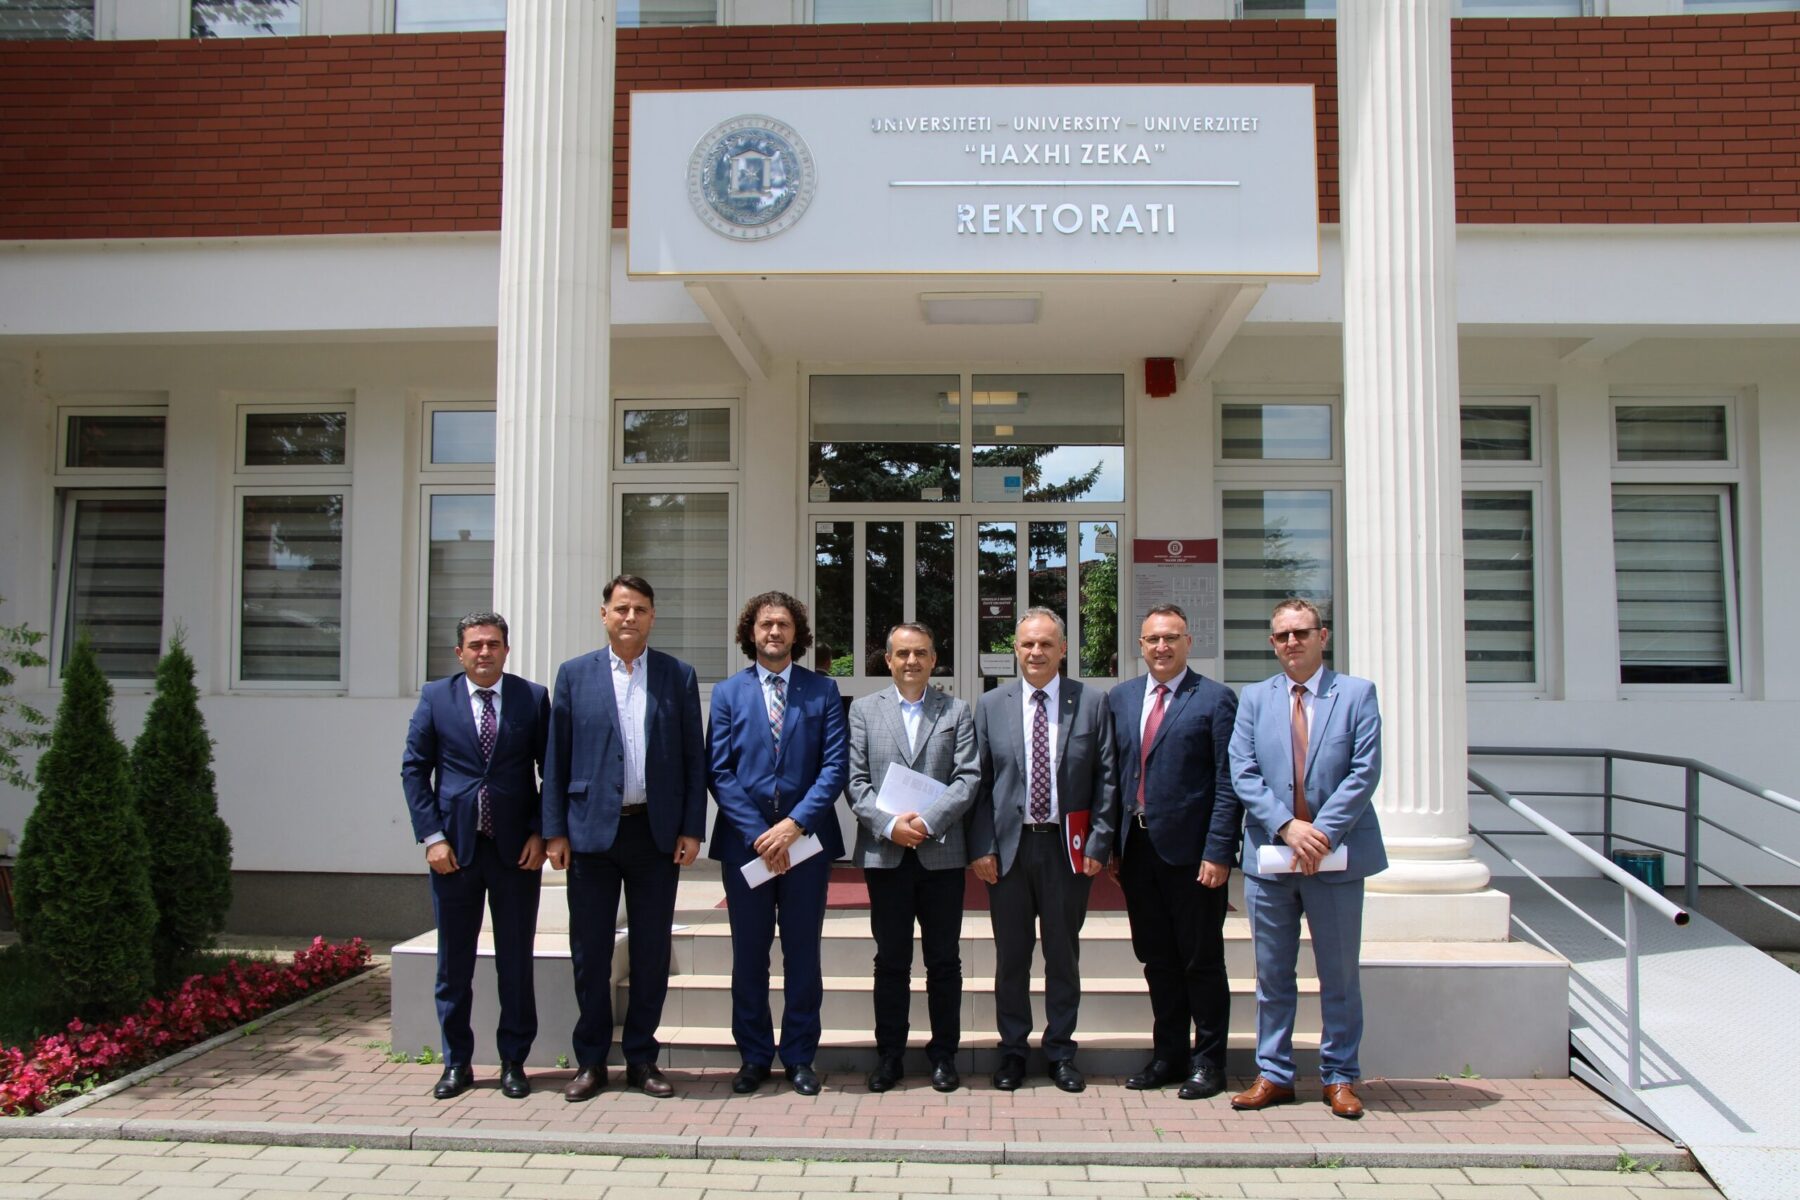 The Conference of Rectors of Public Universities was held at UHZ